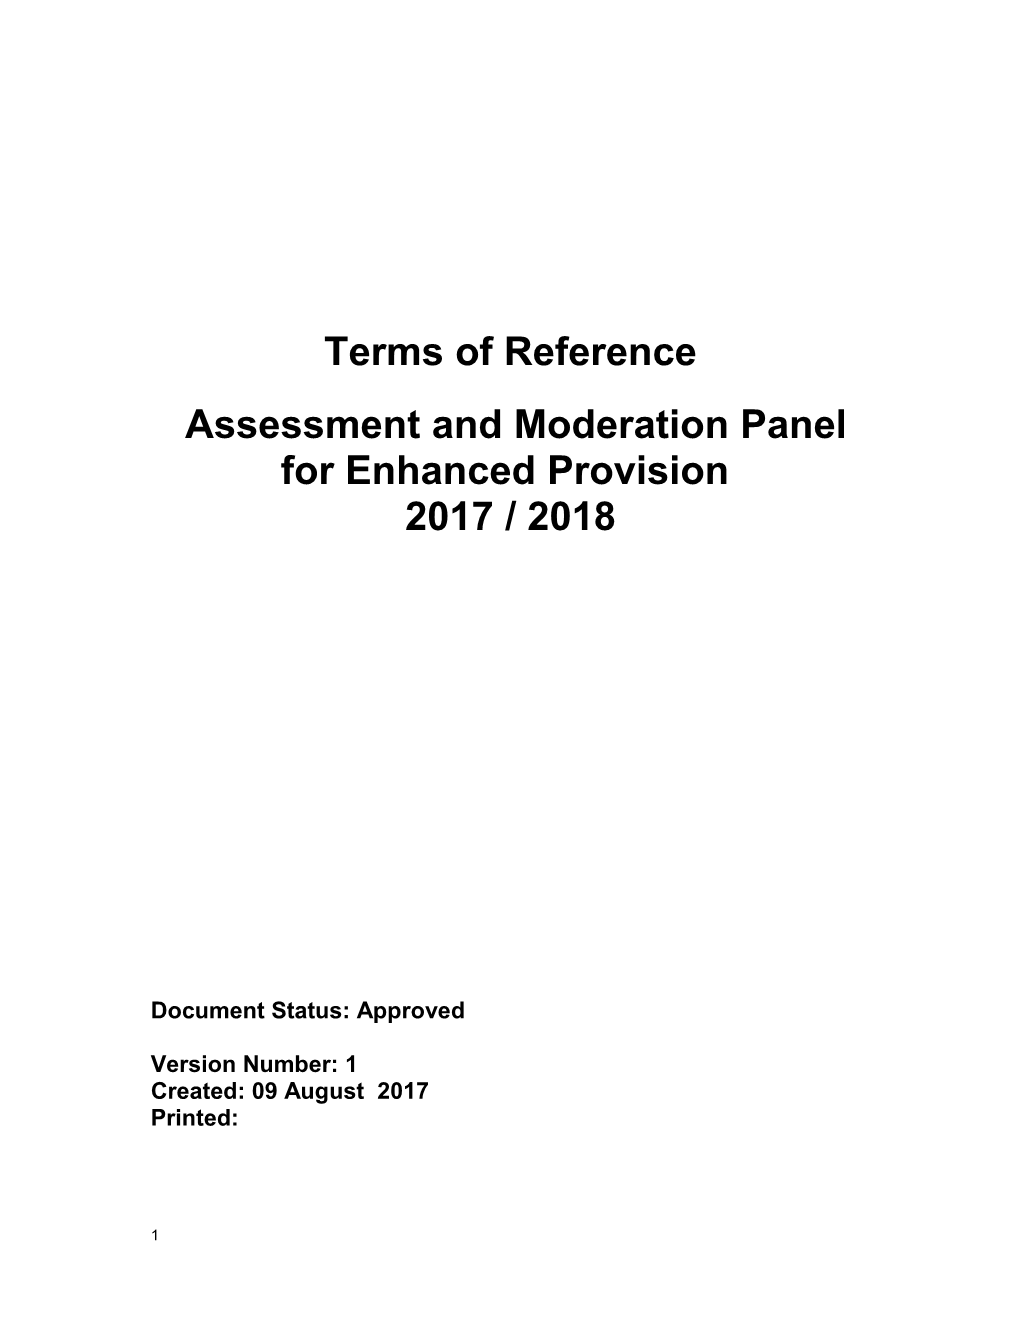 Project Terms of Reference